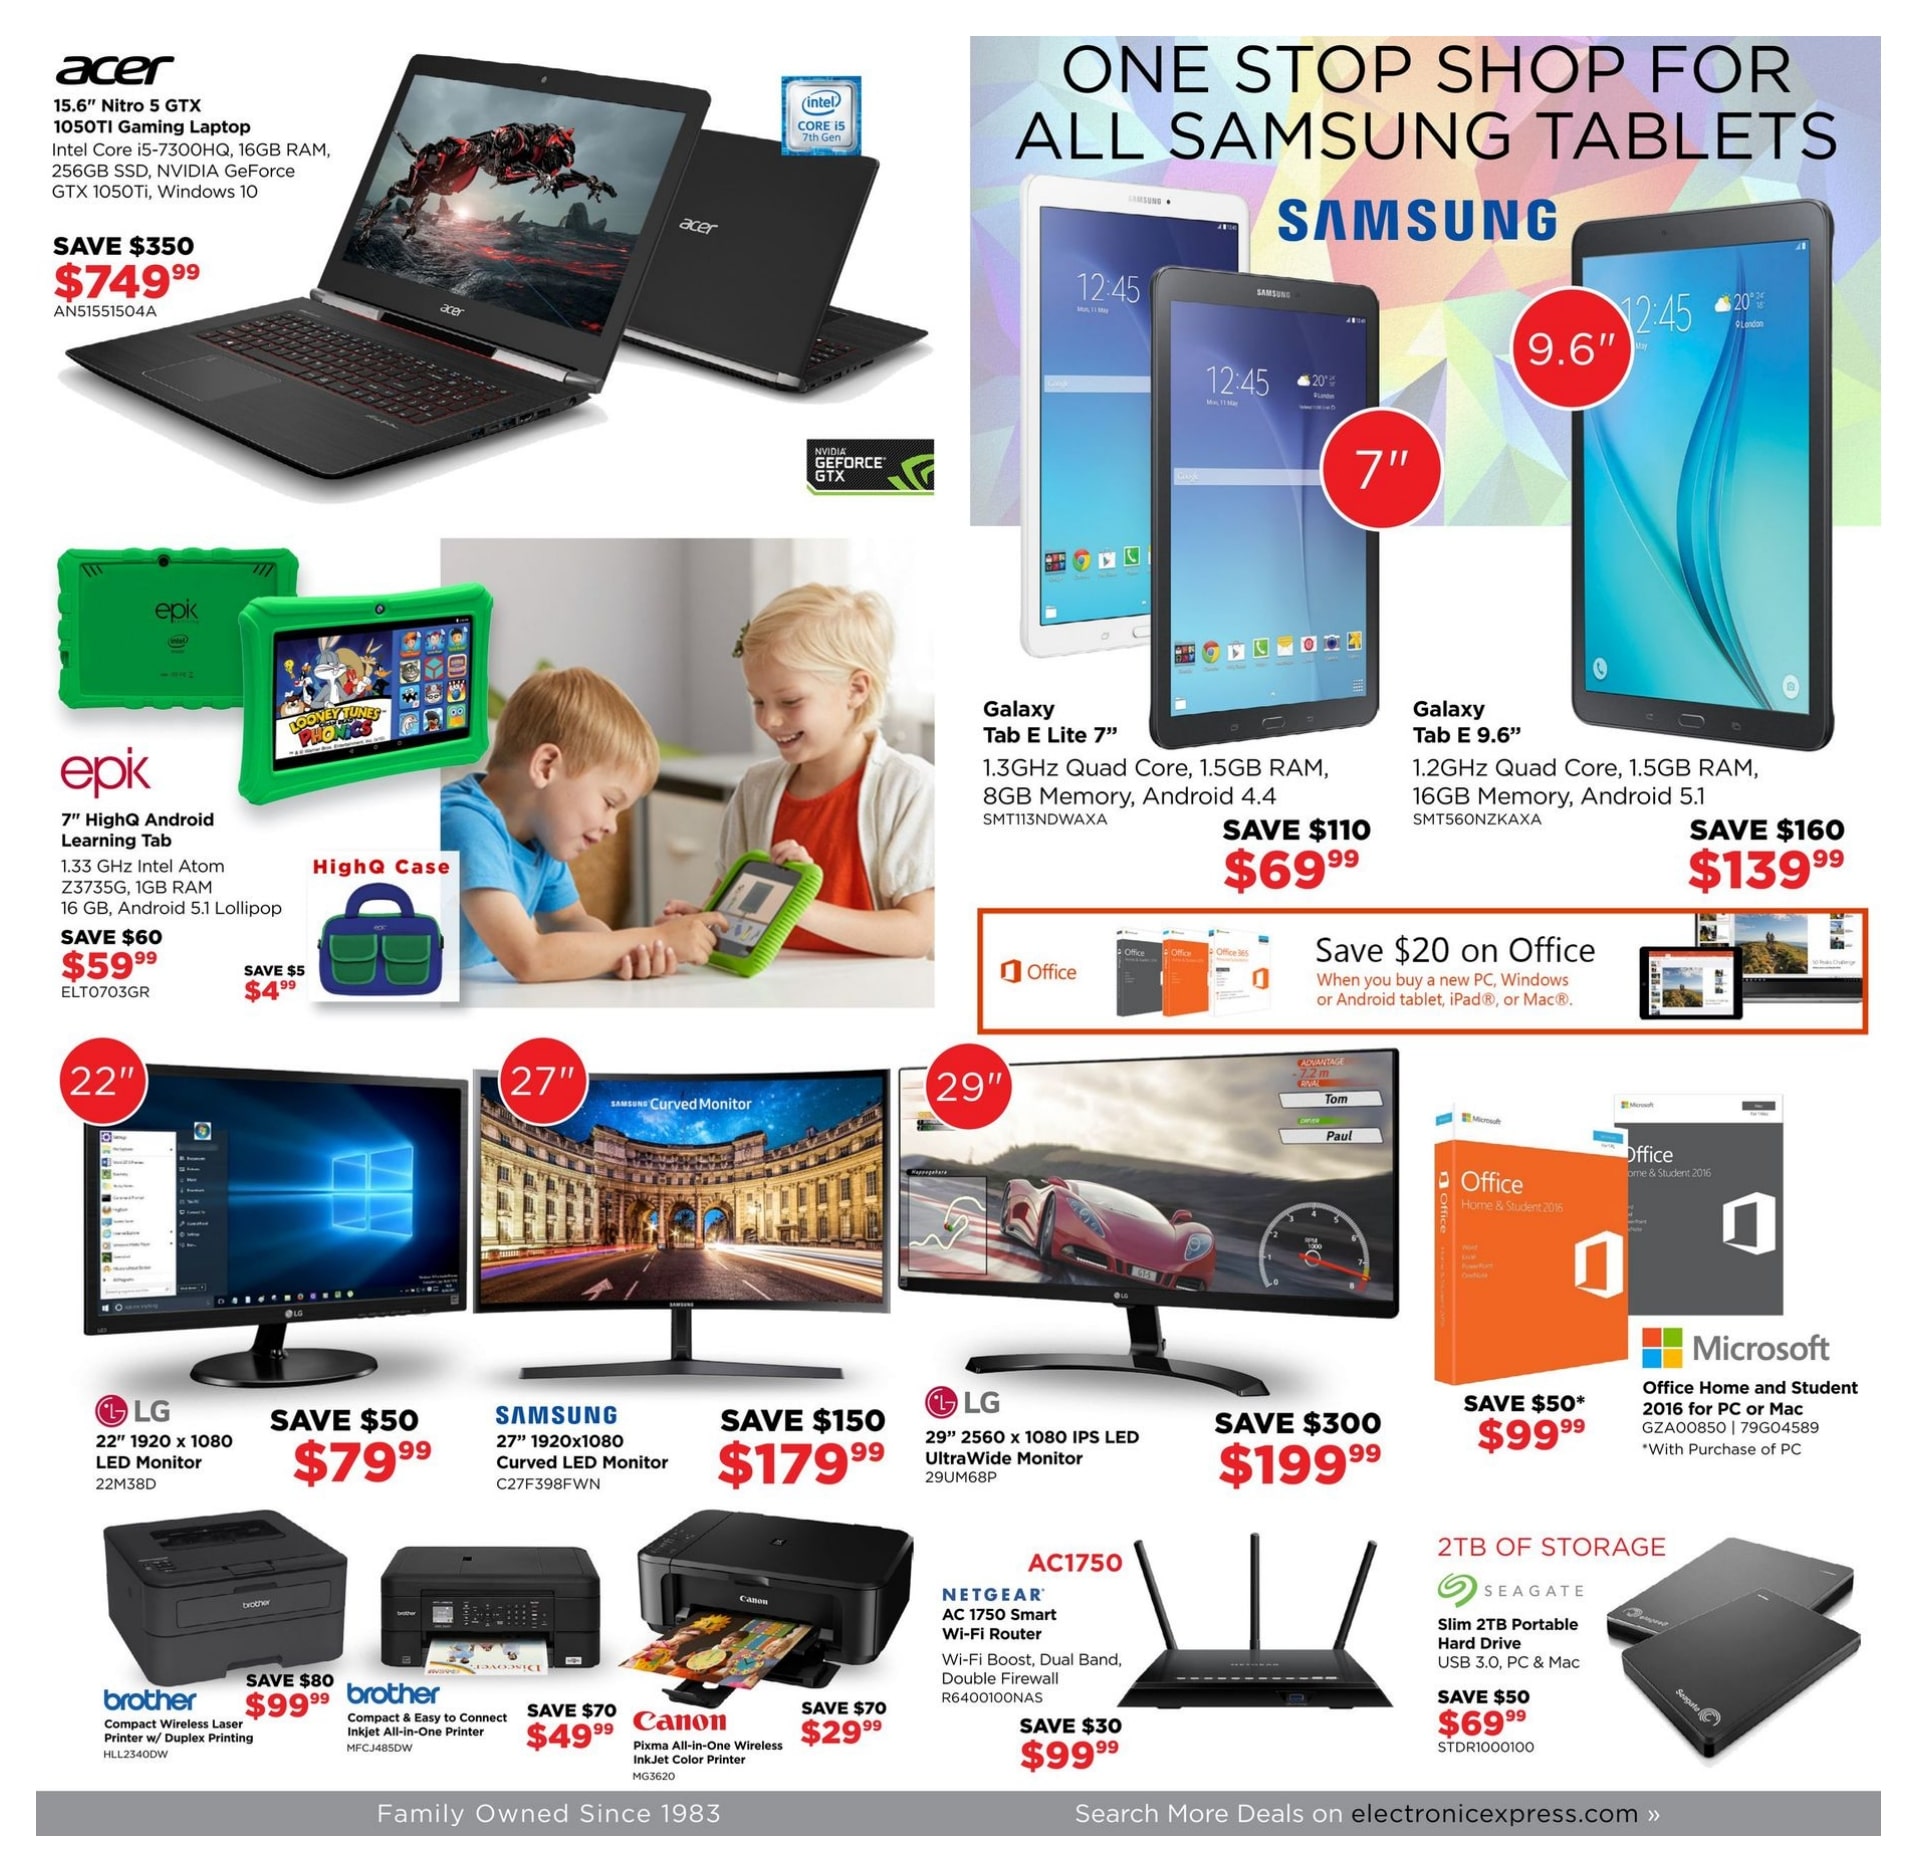 black friday electronic deals